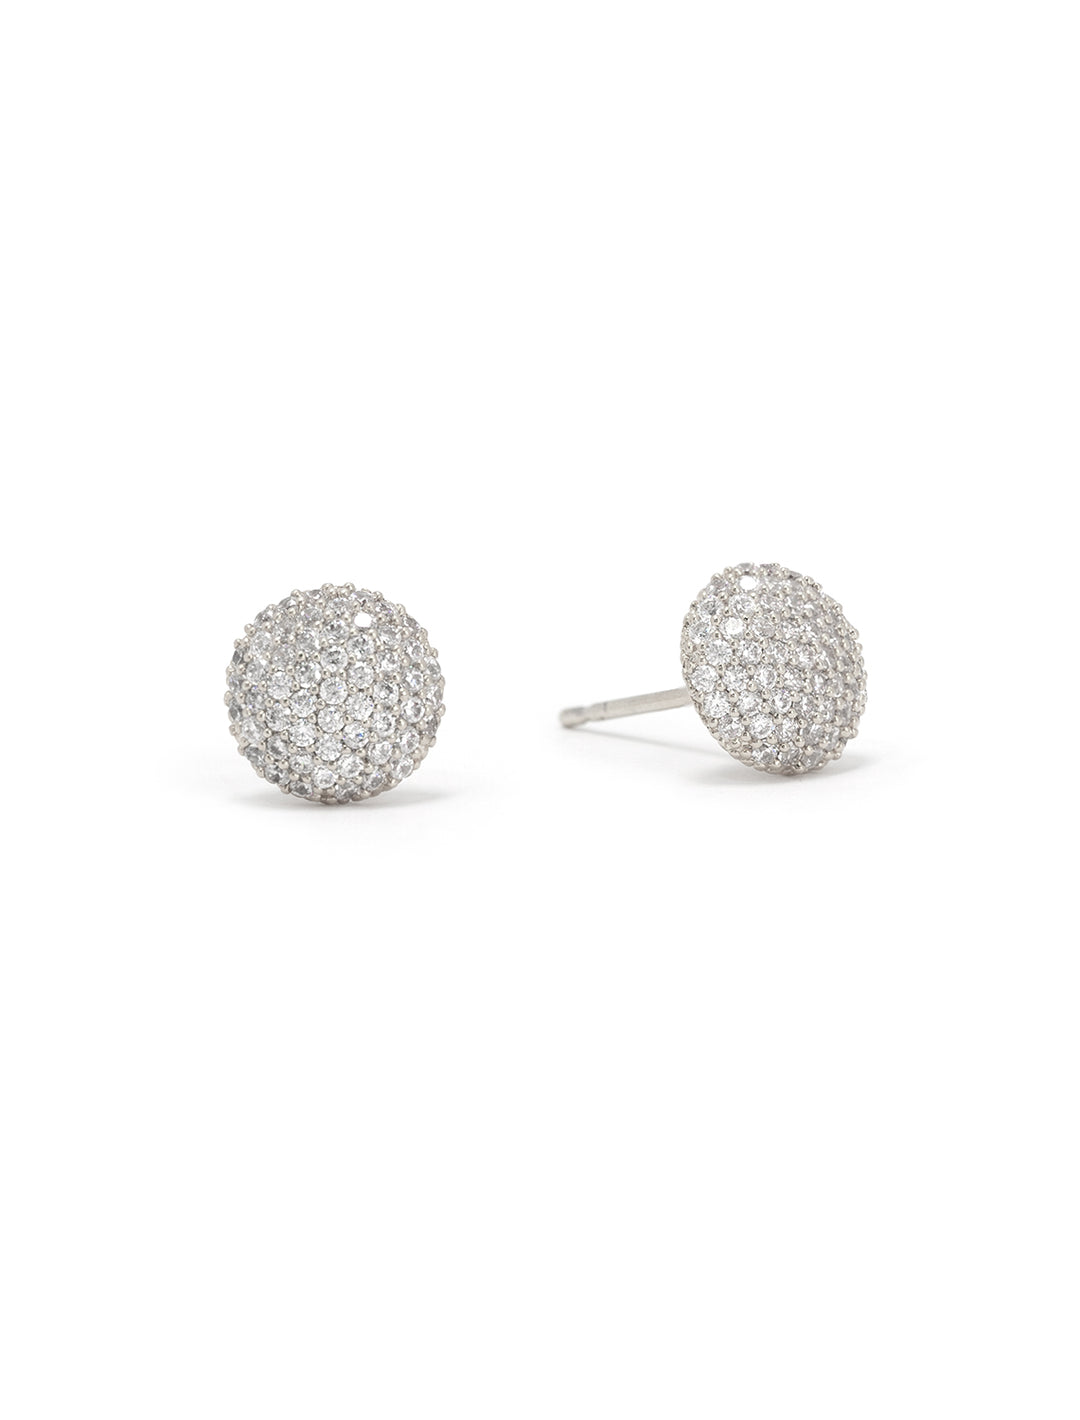 Front view of Tai's cz button stud earrings in silver.